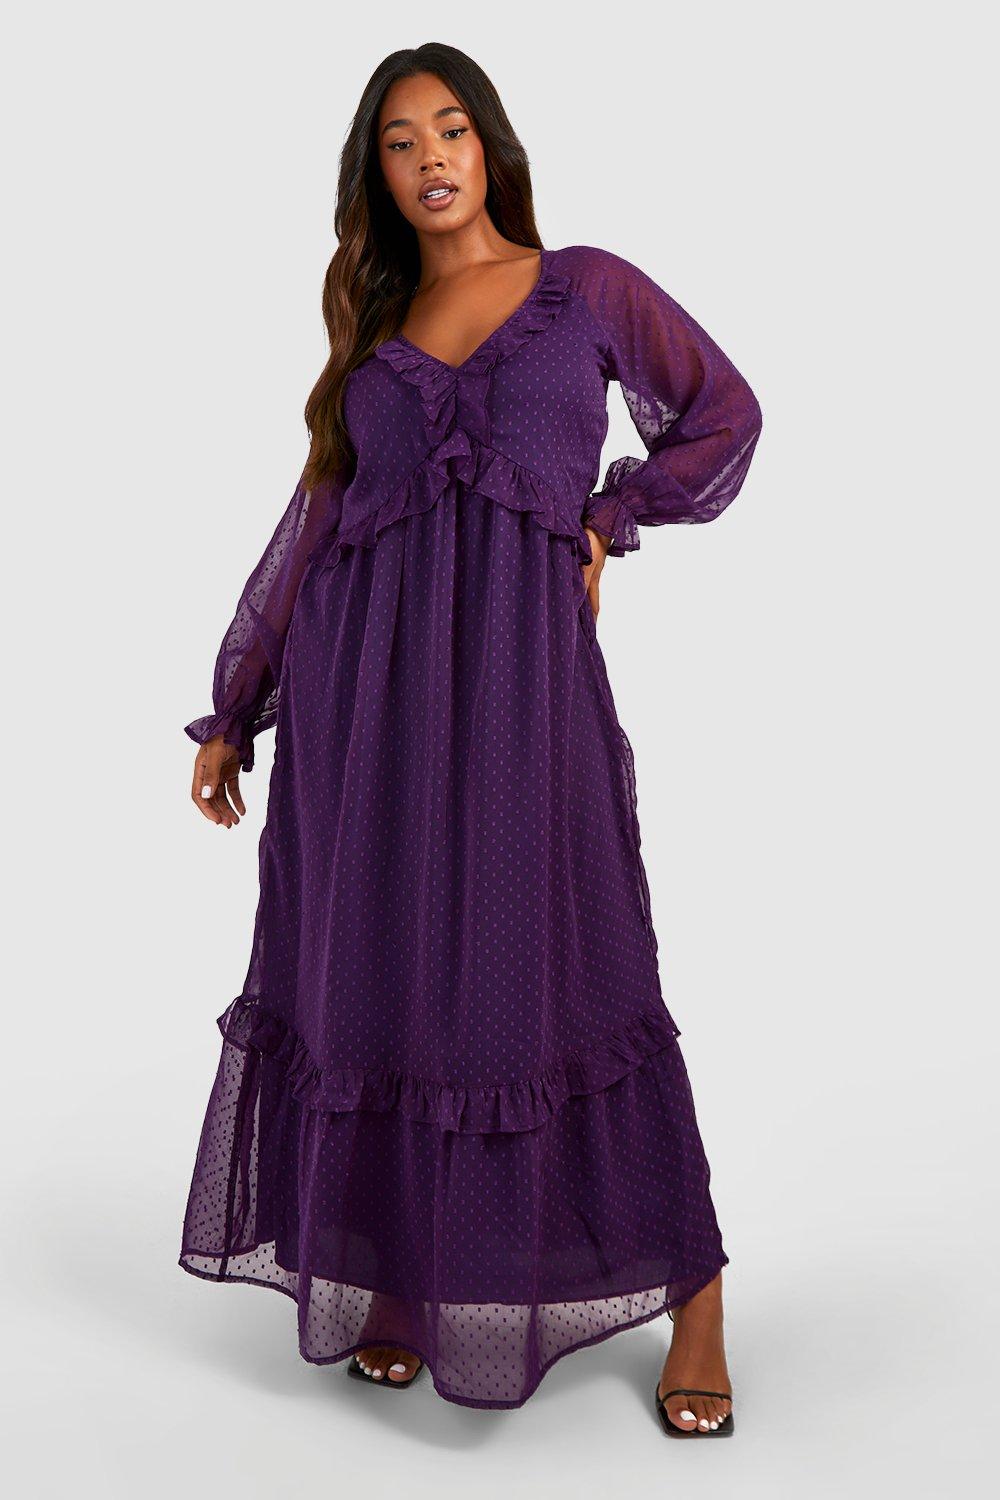 70s Prom, Formal, Evening, Party Dresses Womens Plus Dobby Ruffle Maxi Dress - Purple - 16 $35.00 AT vintagedancer.com